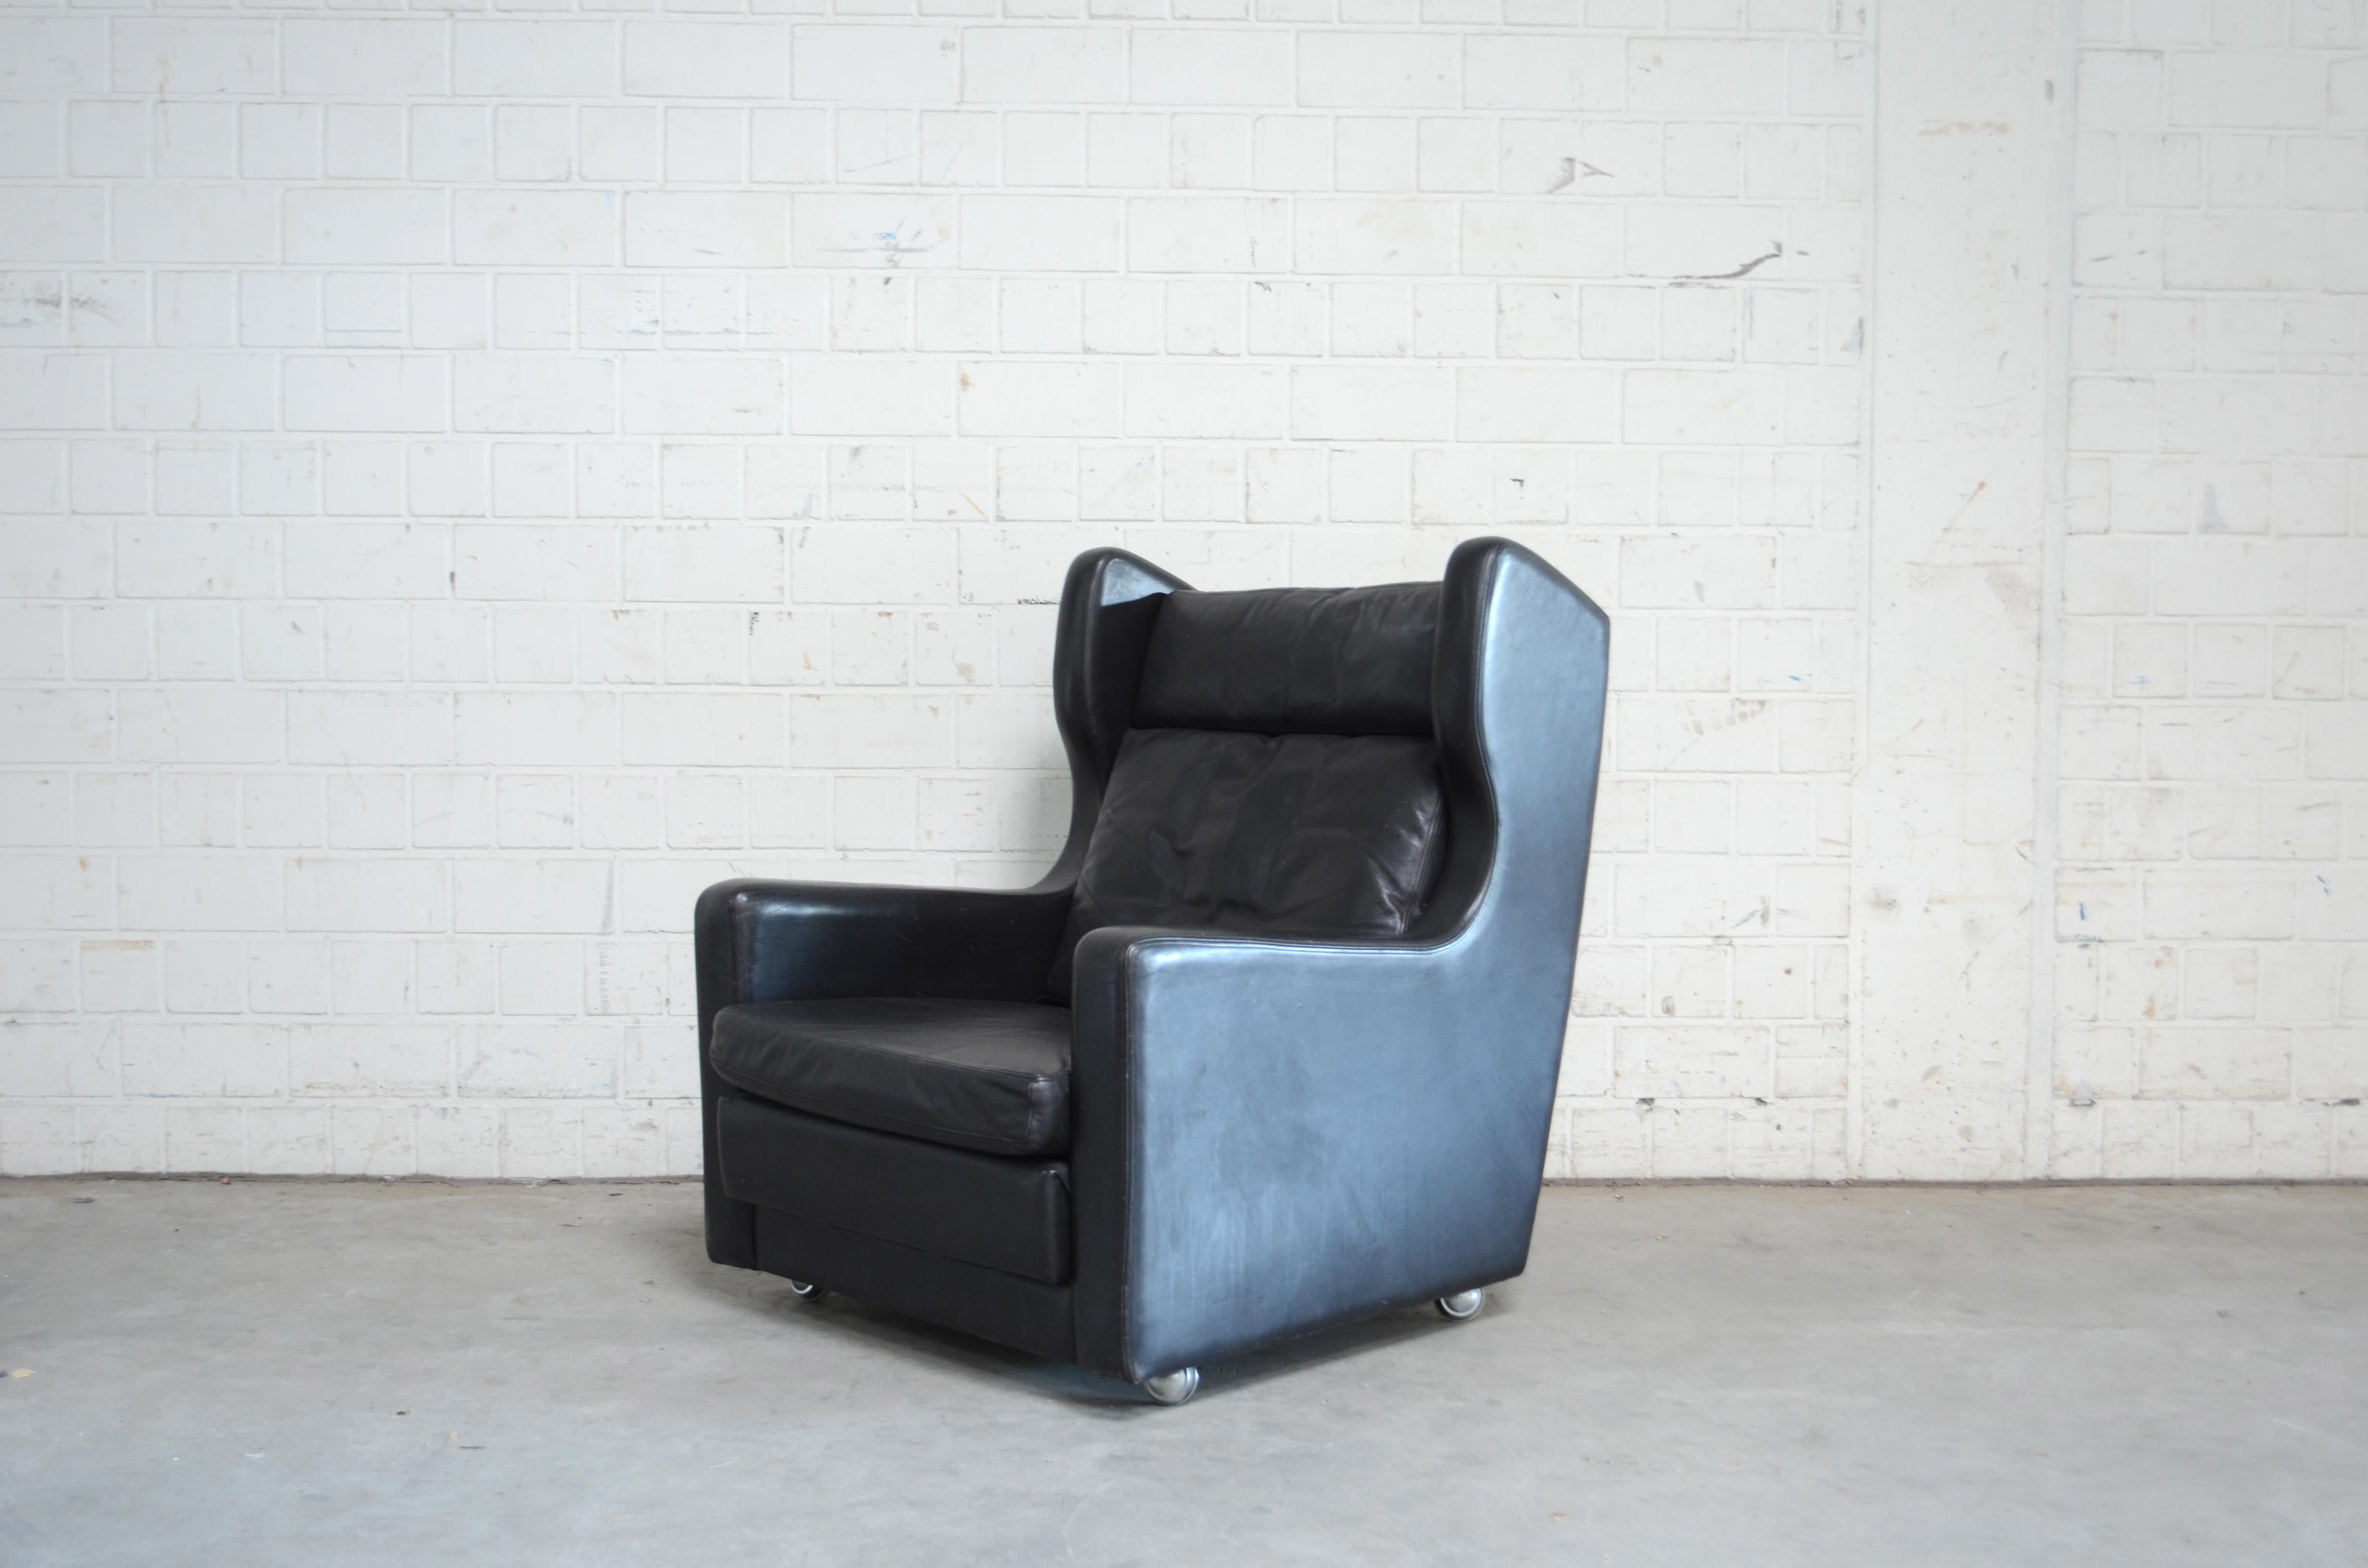 Kill International highback Chair in black aniline leather.
The seat can be turn into a lounge seat with high comfort.
With rollable chrom feets.